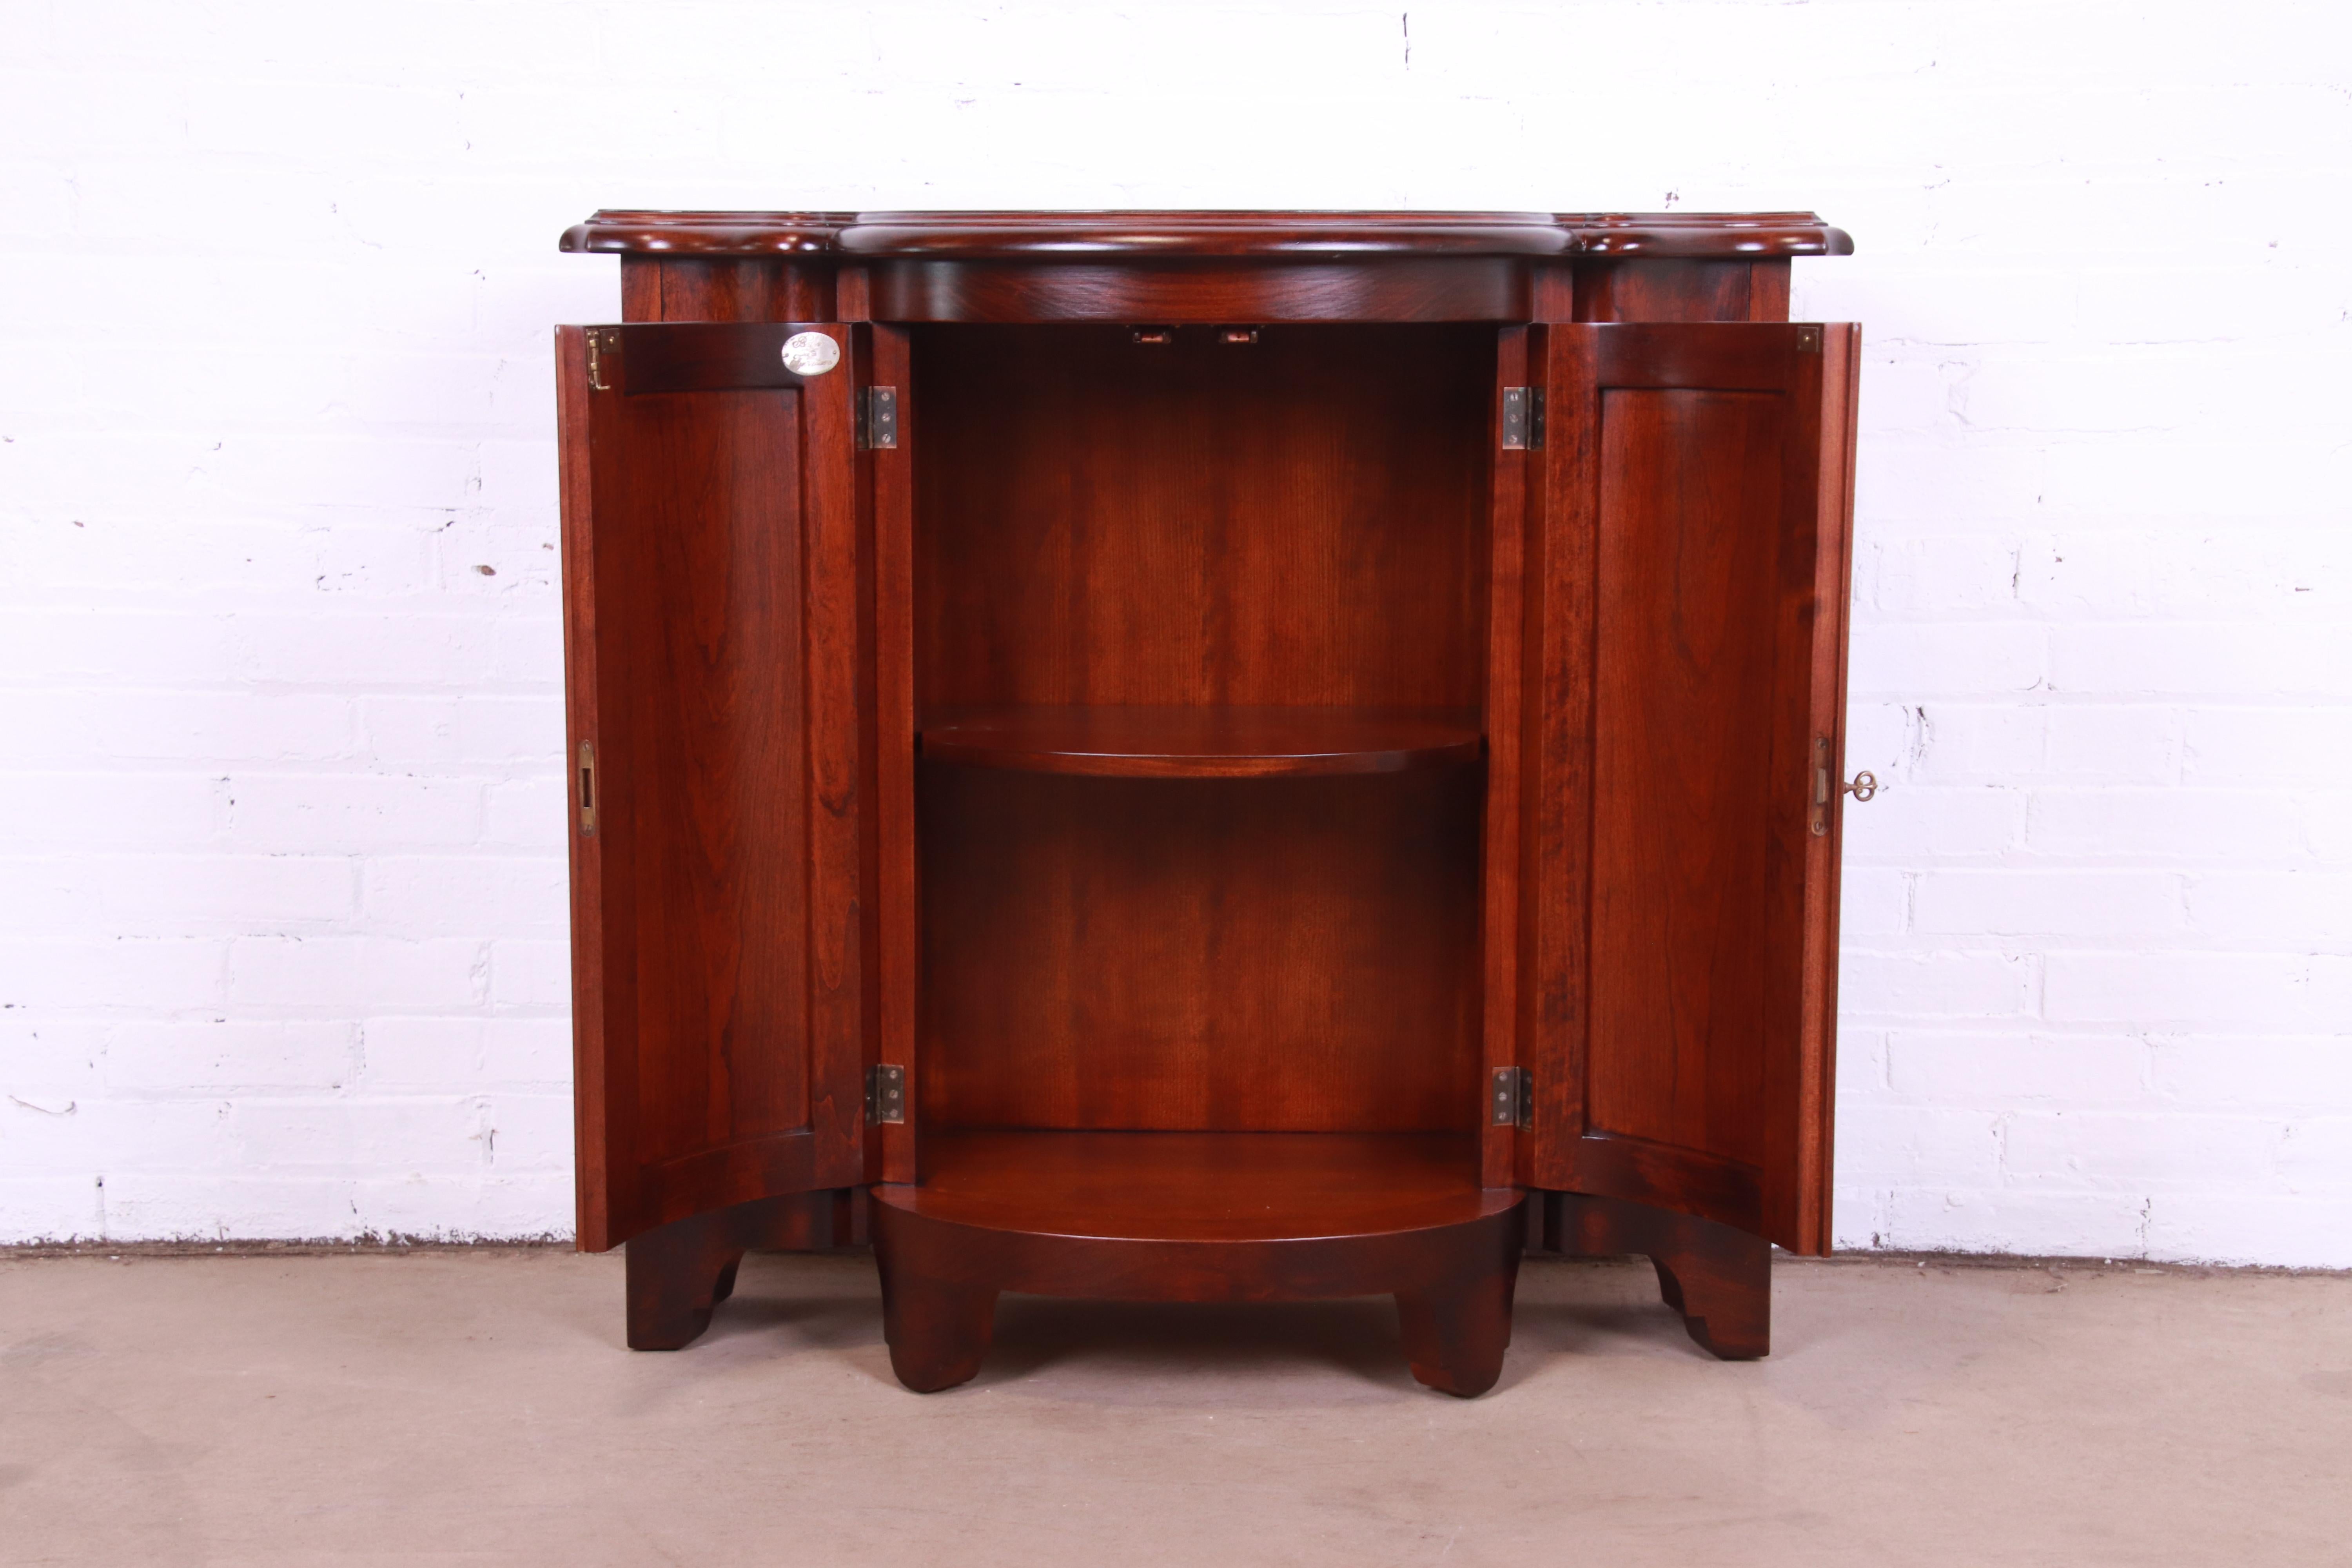 Baker Furniture Regency Cherry Wood Demilune Console or Bar Cabinet, Refinished For Sale 1